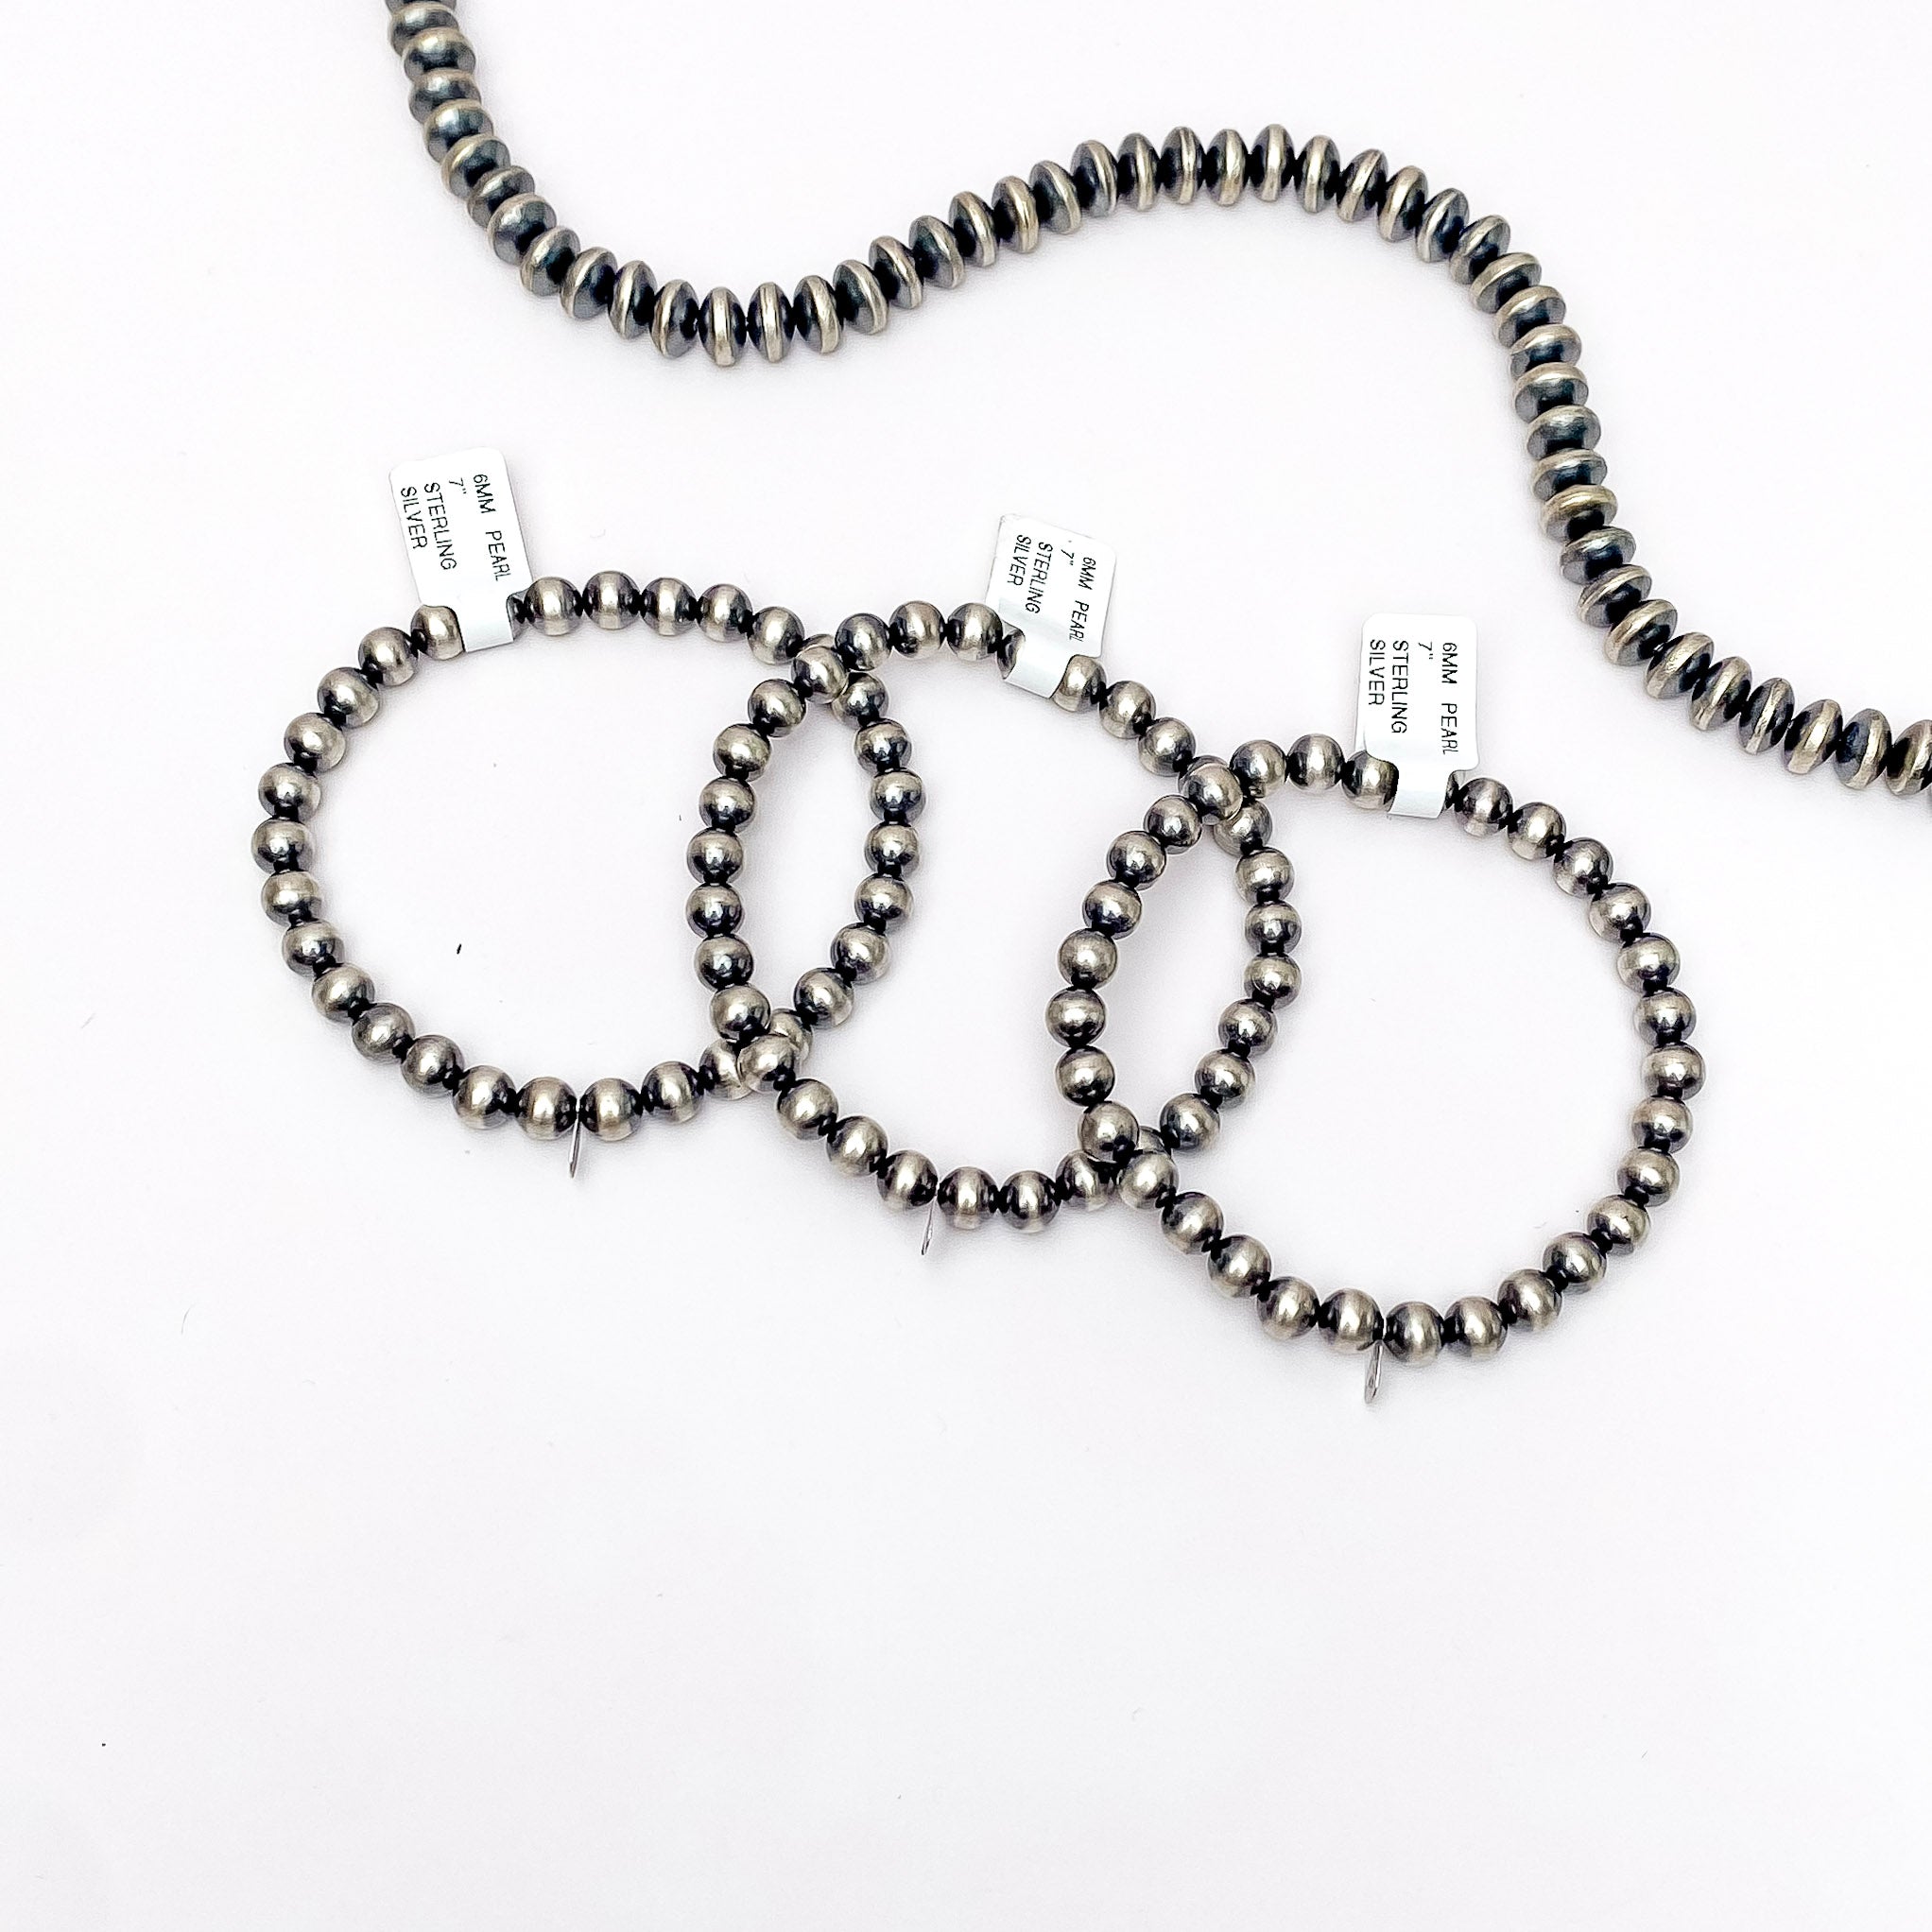 Centered in the picture is three navajo pearl bracelets on a white background. 